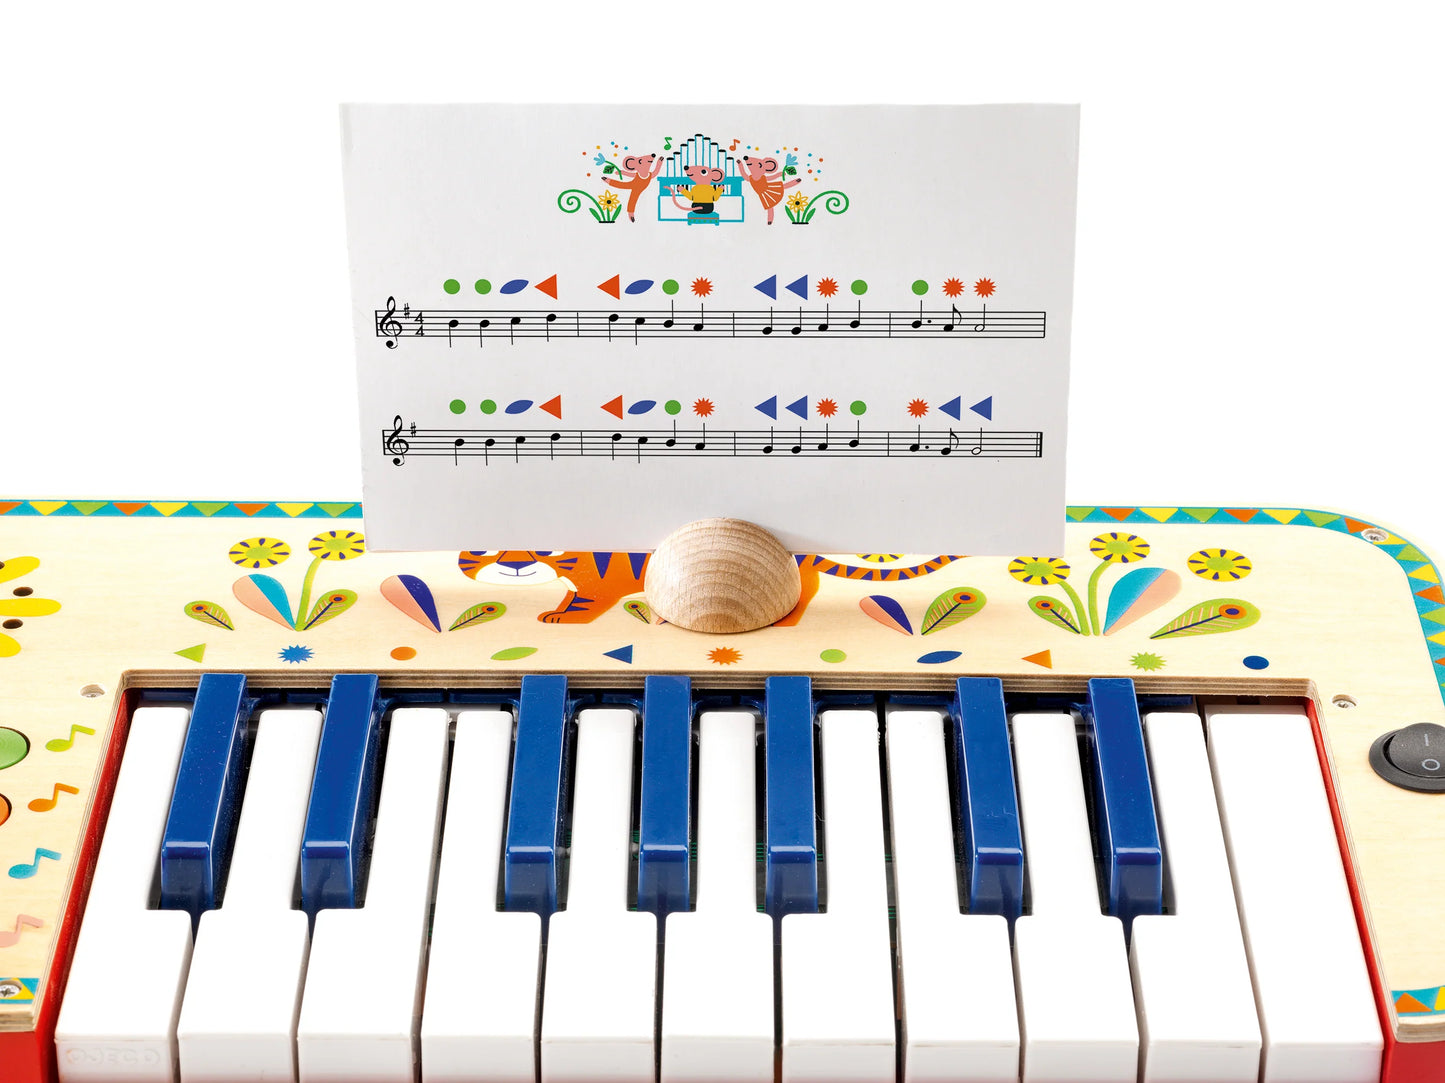 Animambo Electric Keyboard Musical Instrument